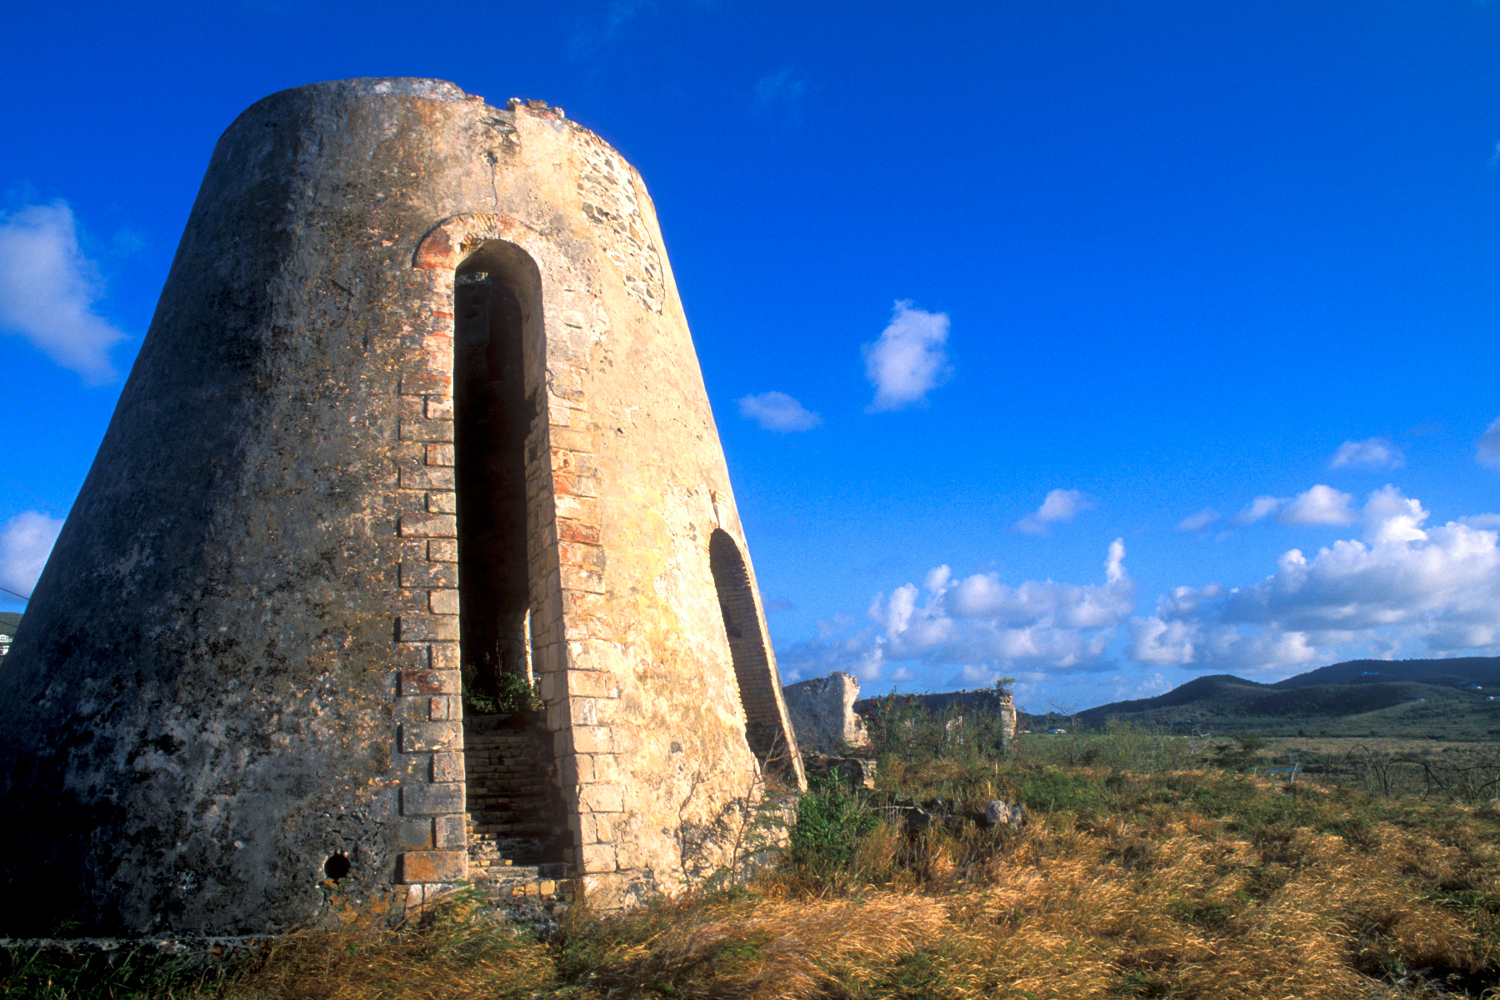 On the St Croix heritage trail. Image by MyLoupe / UIG / Getty